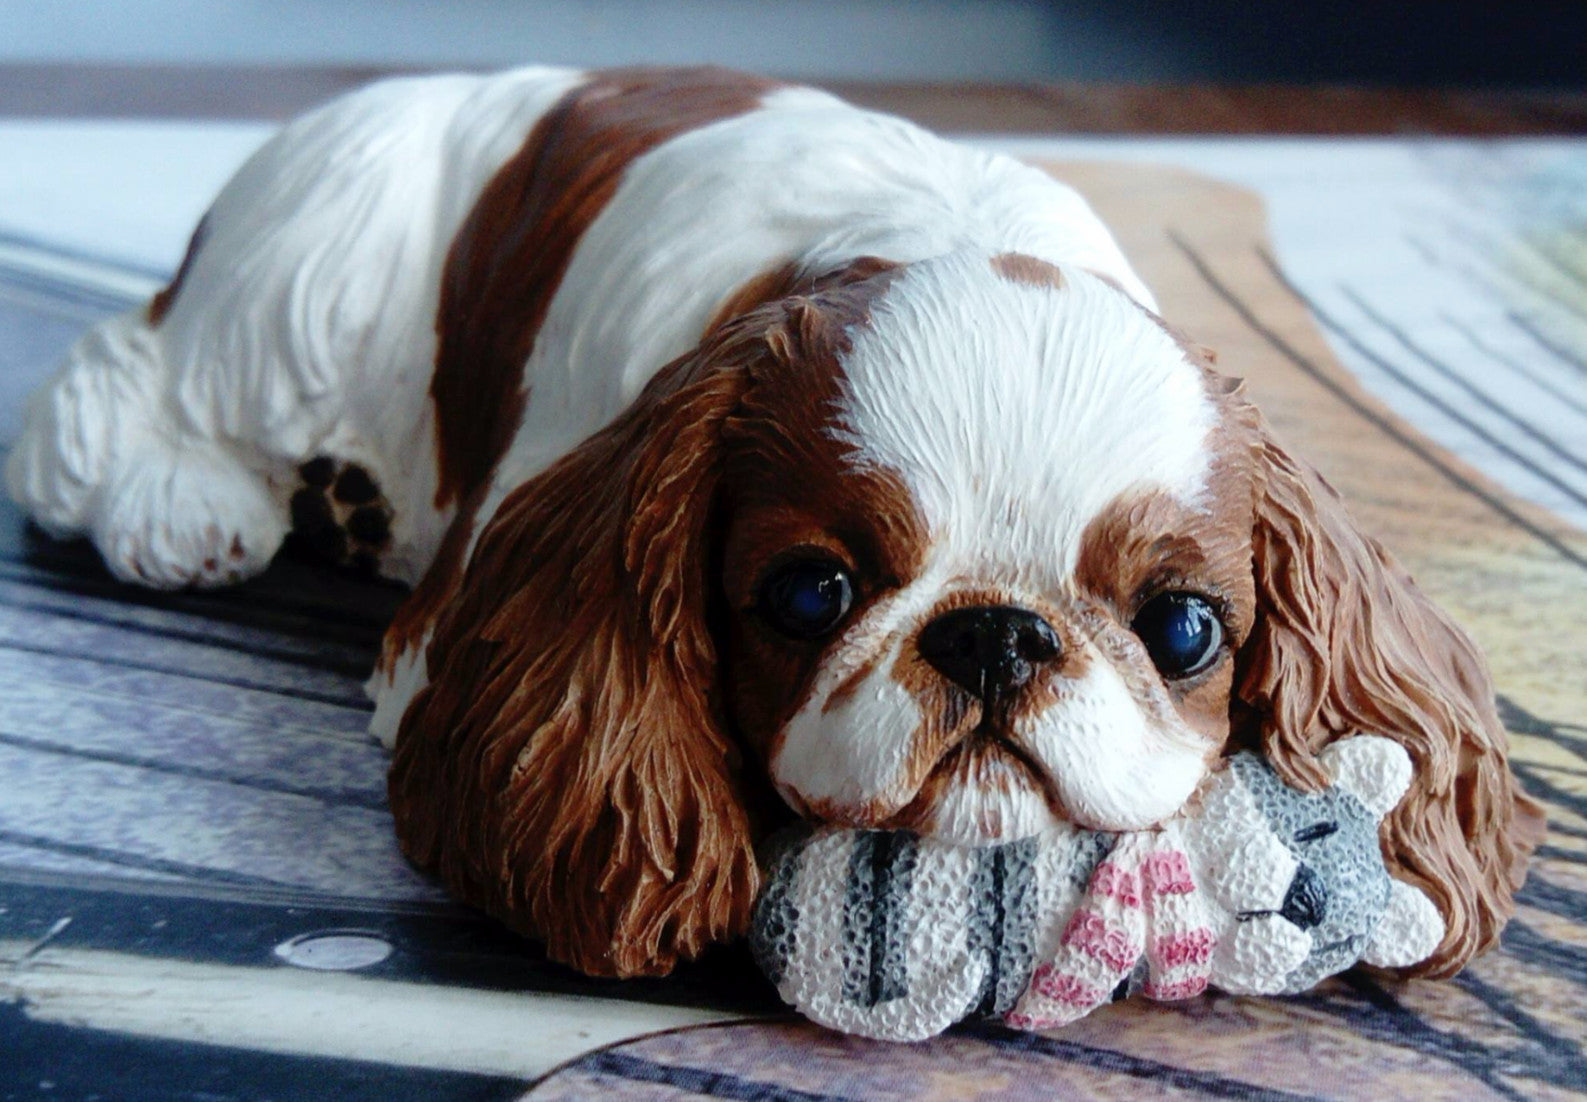 Sculpture of an English Toy Spaniel by A J Turner